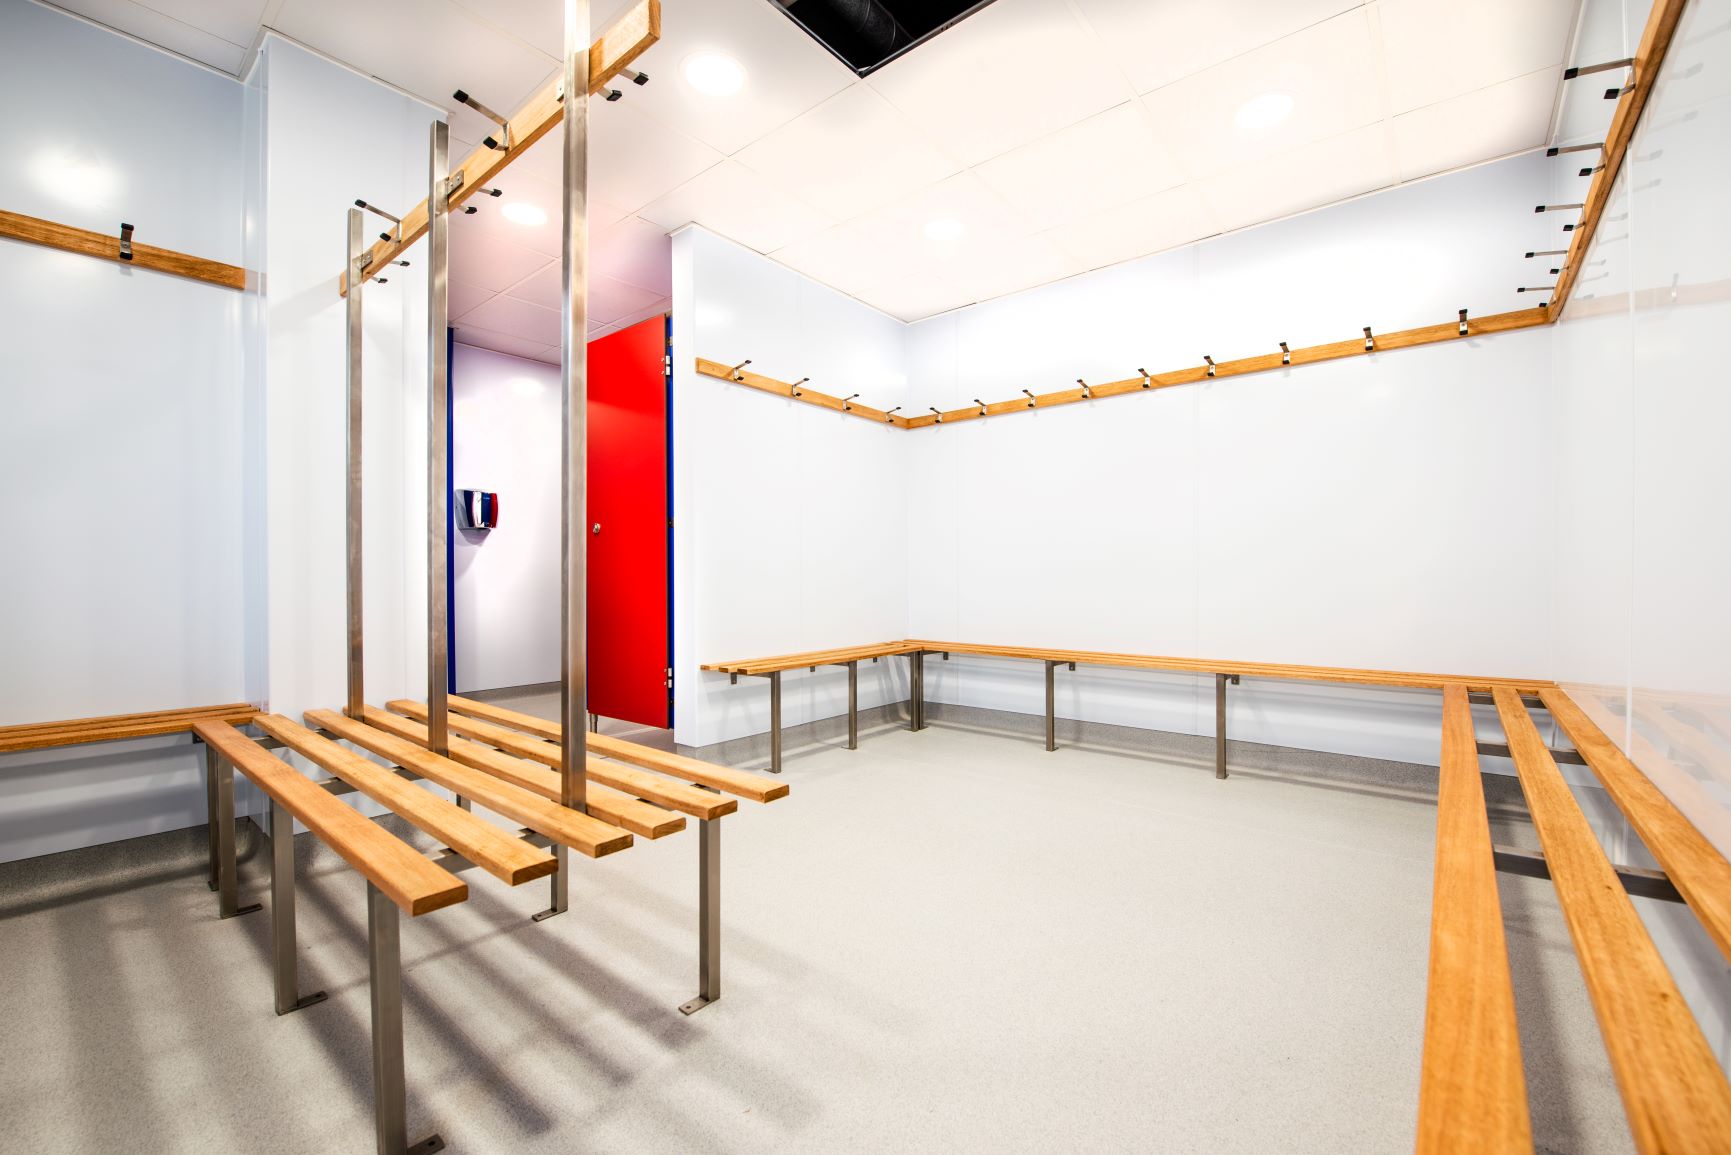 Changing Room Bench Dimensions and Sizing for Your Washrooms